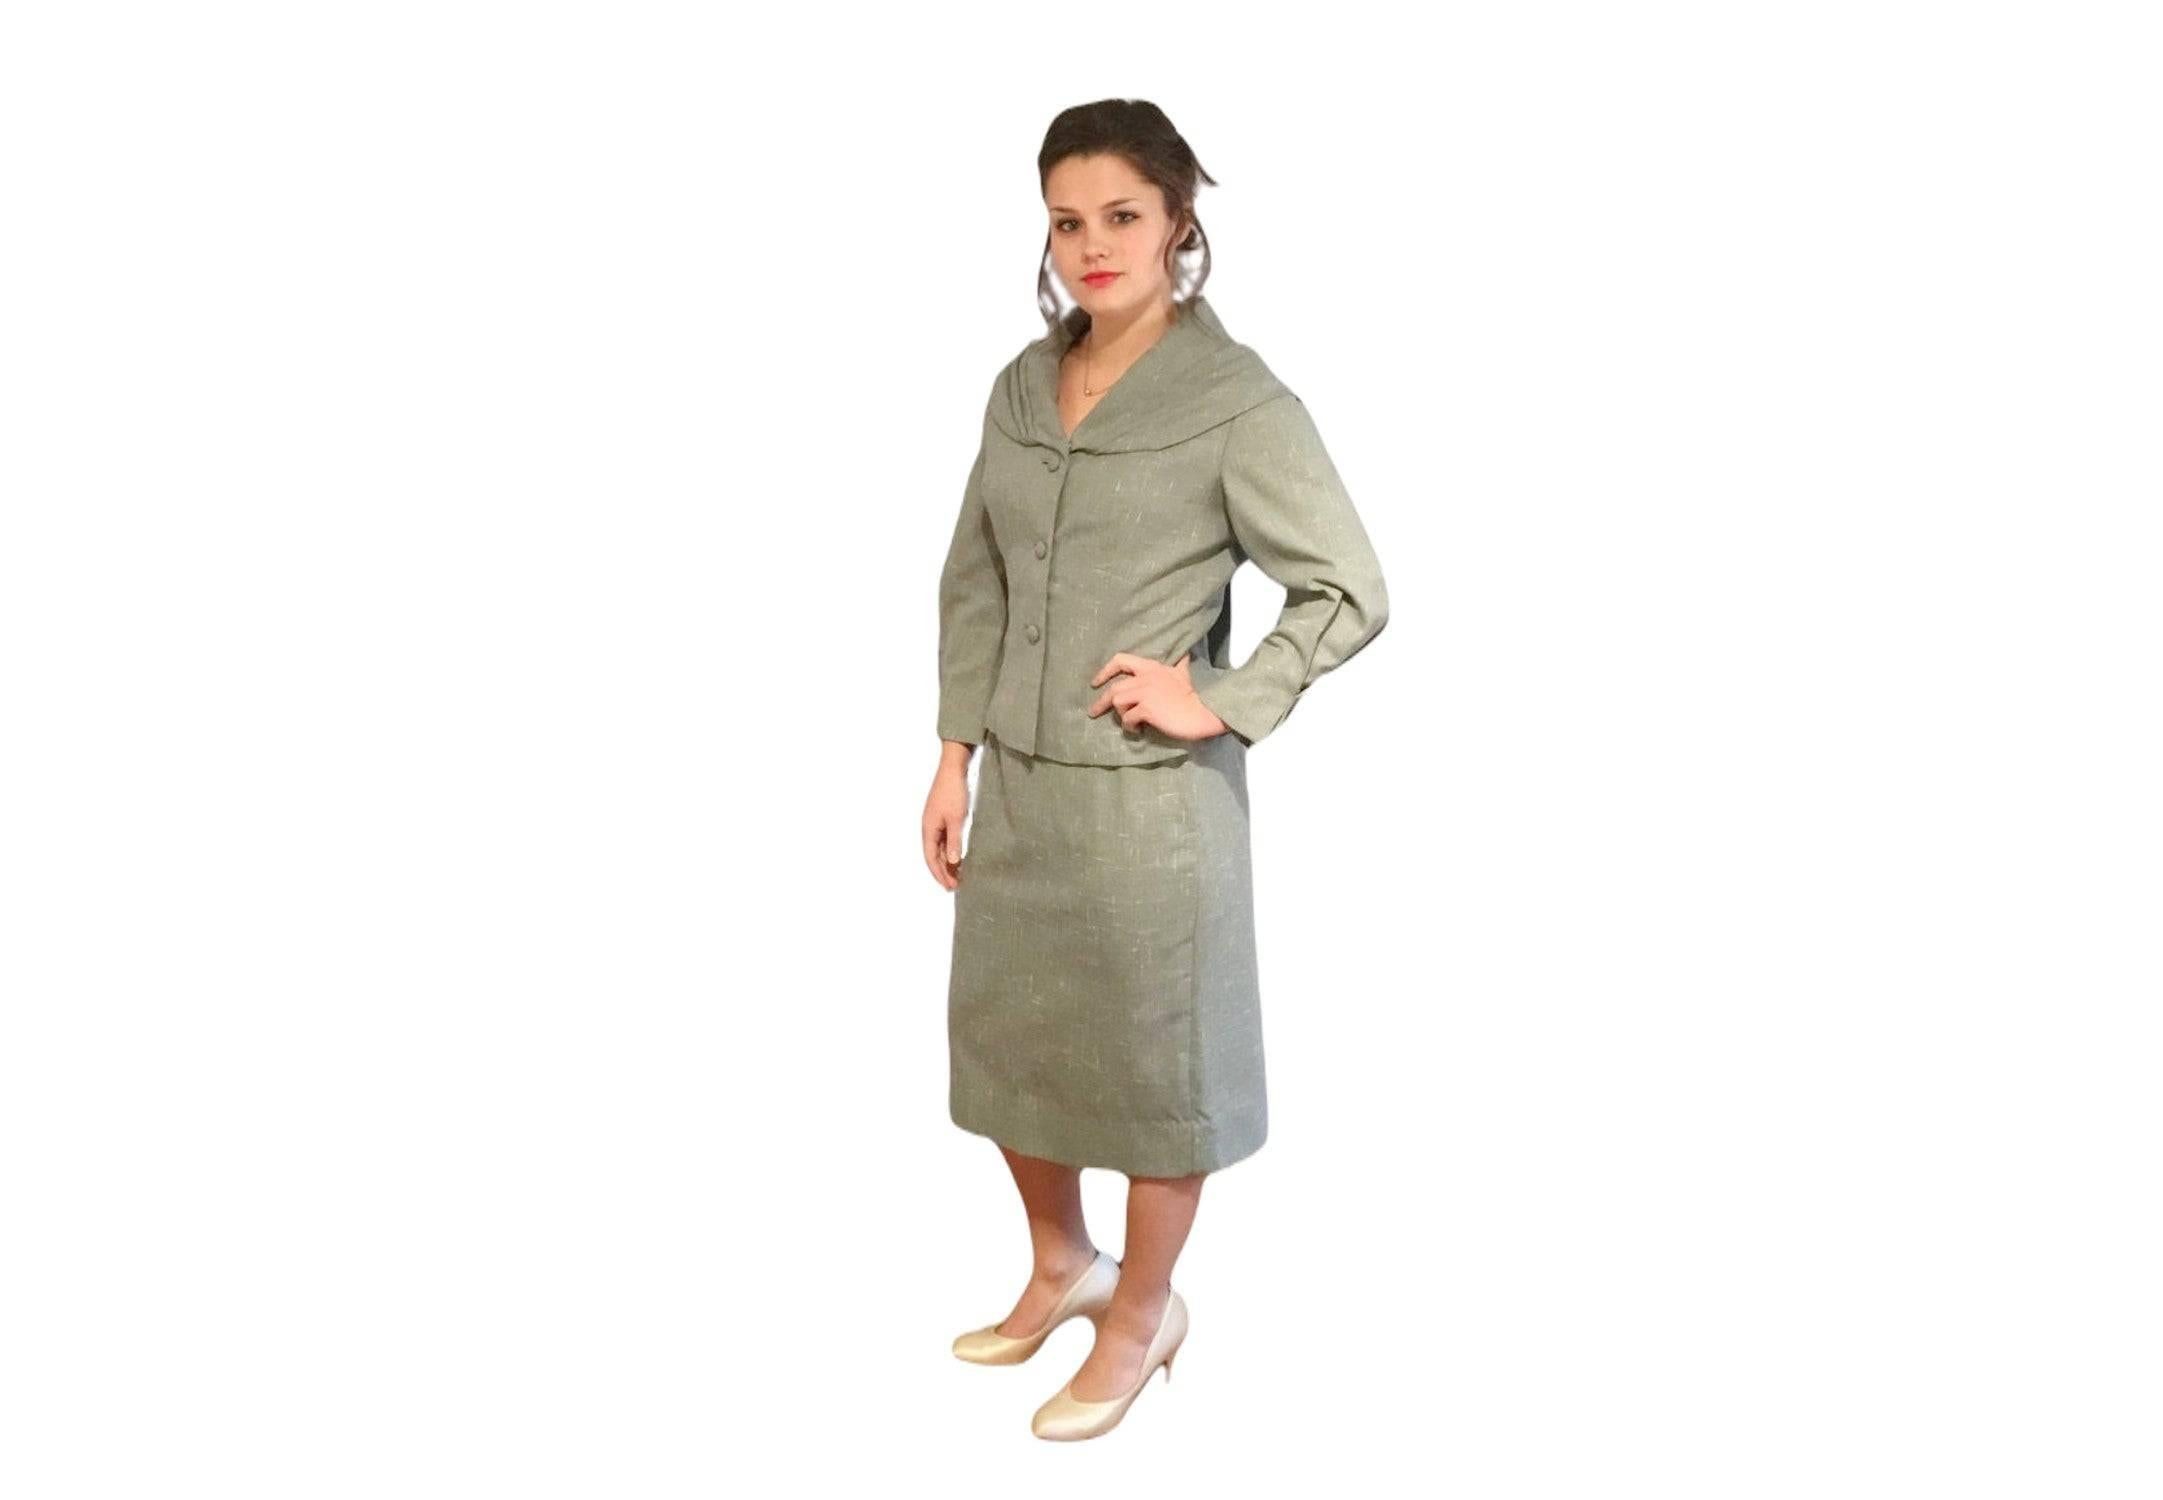 Simply darling late 1950s/early 1960s Lilli Ann pencil skirt suit with pleated sailor's collar! Beautiful construction as you would expect from vintage Lilli Ann. In a hard-to-find neutral grey-green seafoam color, this is a wearable piece across